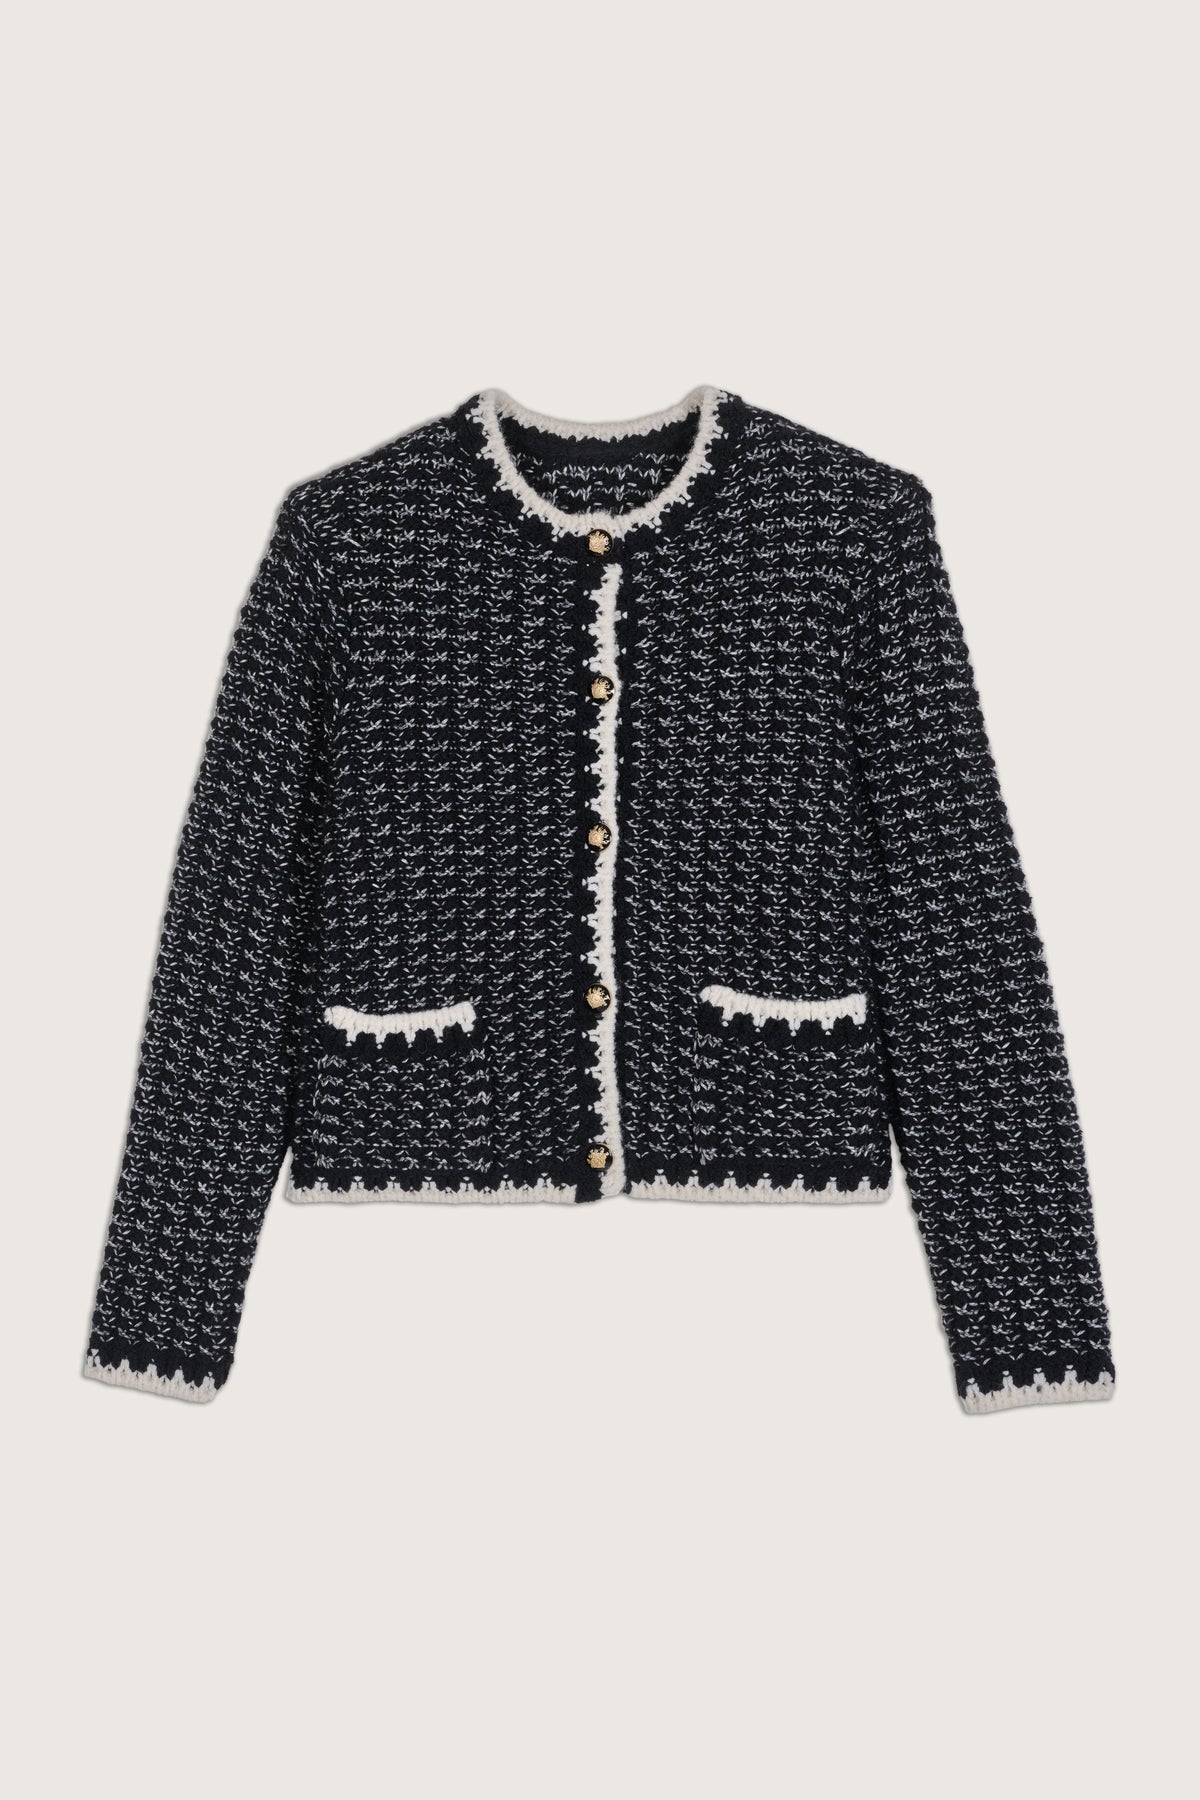 Knitted black and white crew neck cardigan with contrast edging and black and gold metallic buttons